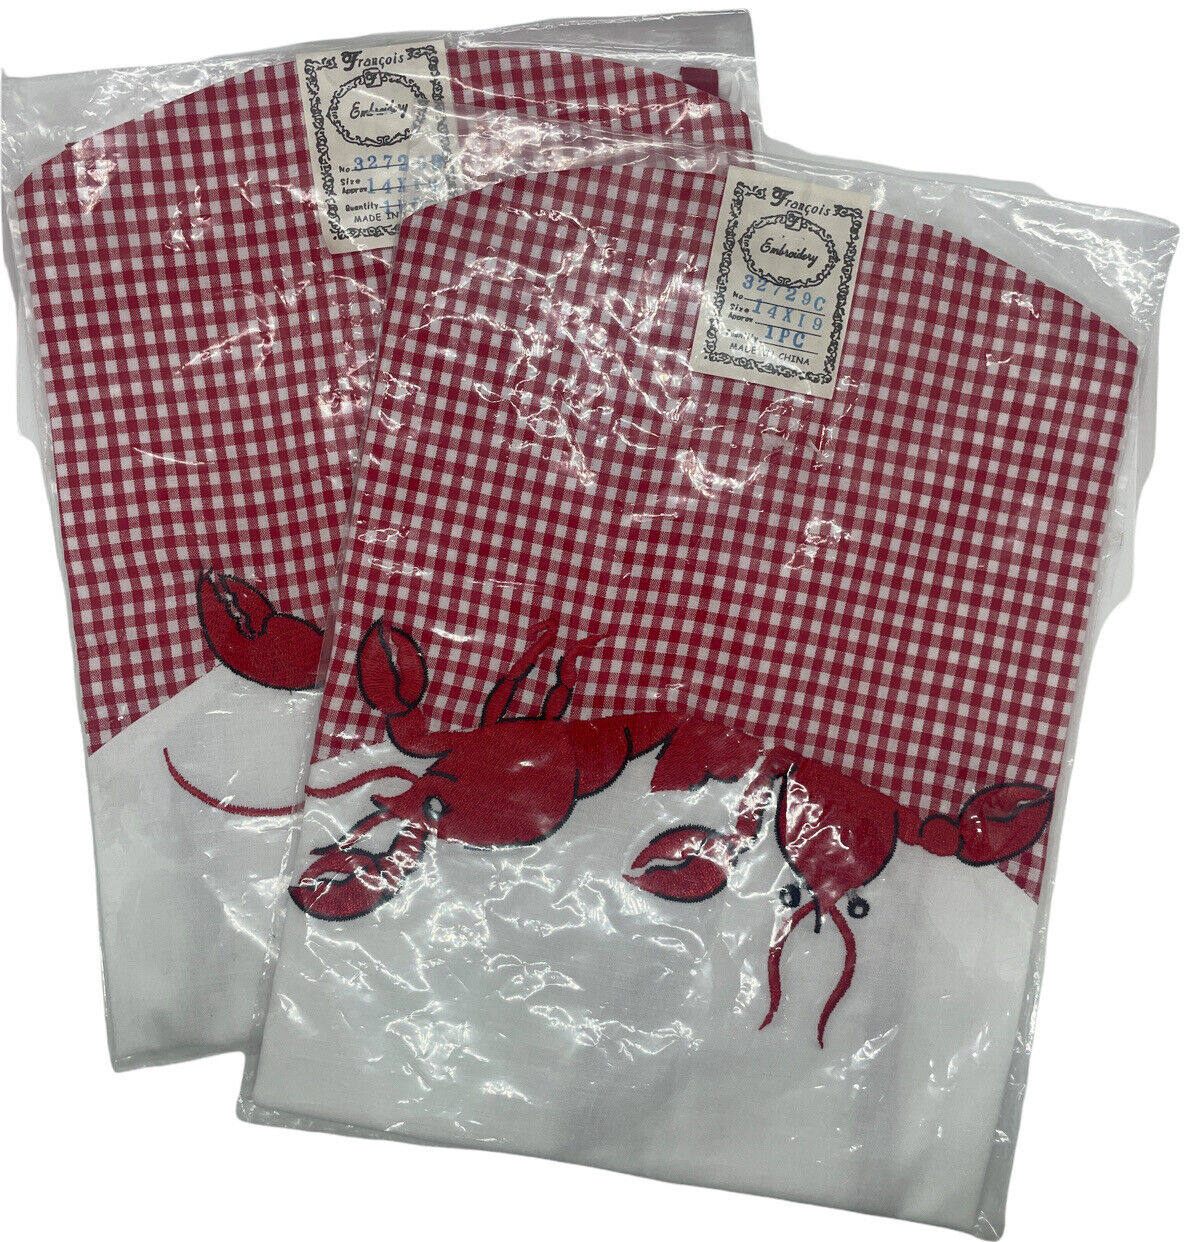 2 New Vintage Francois Embroidery Stitched Lobster Bibs 14x9” Cute Checkered